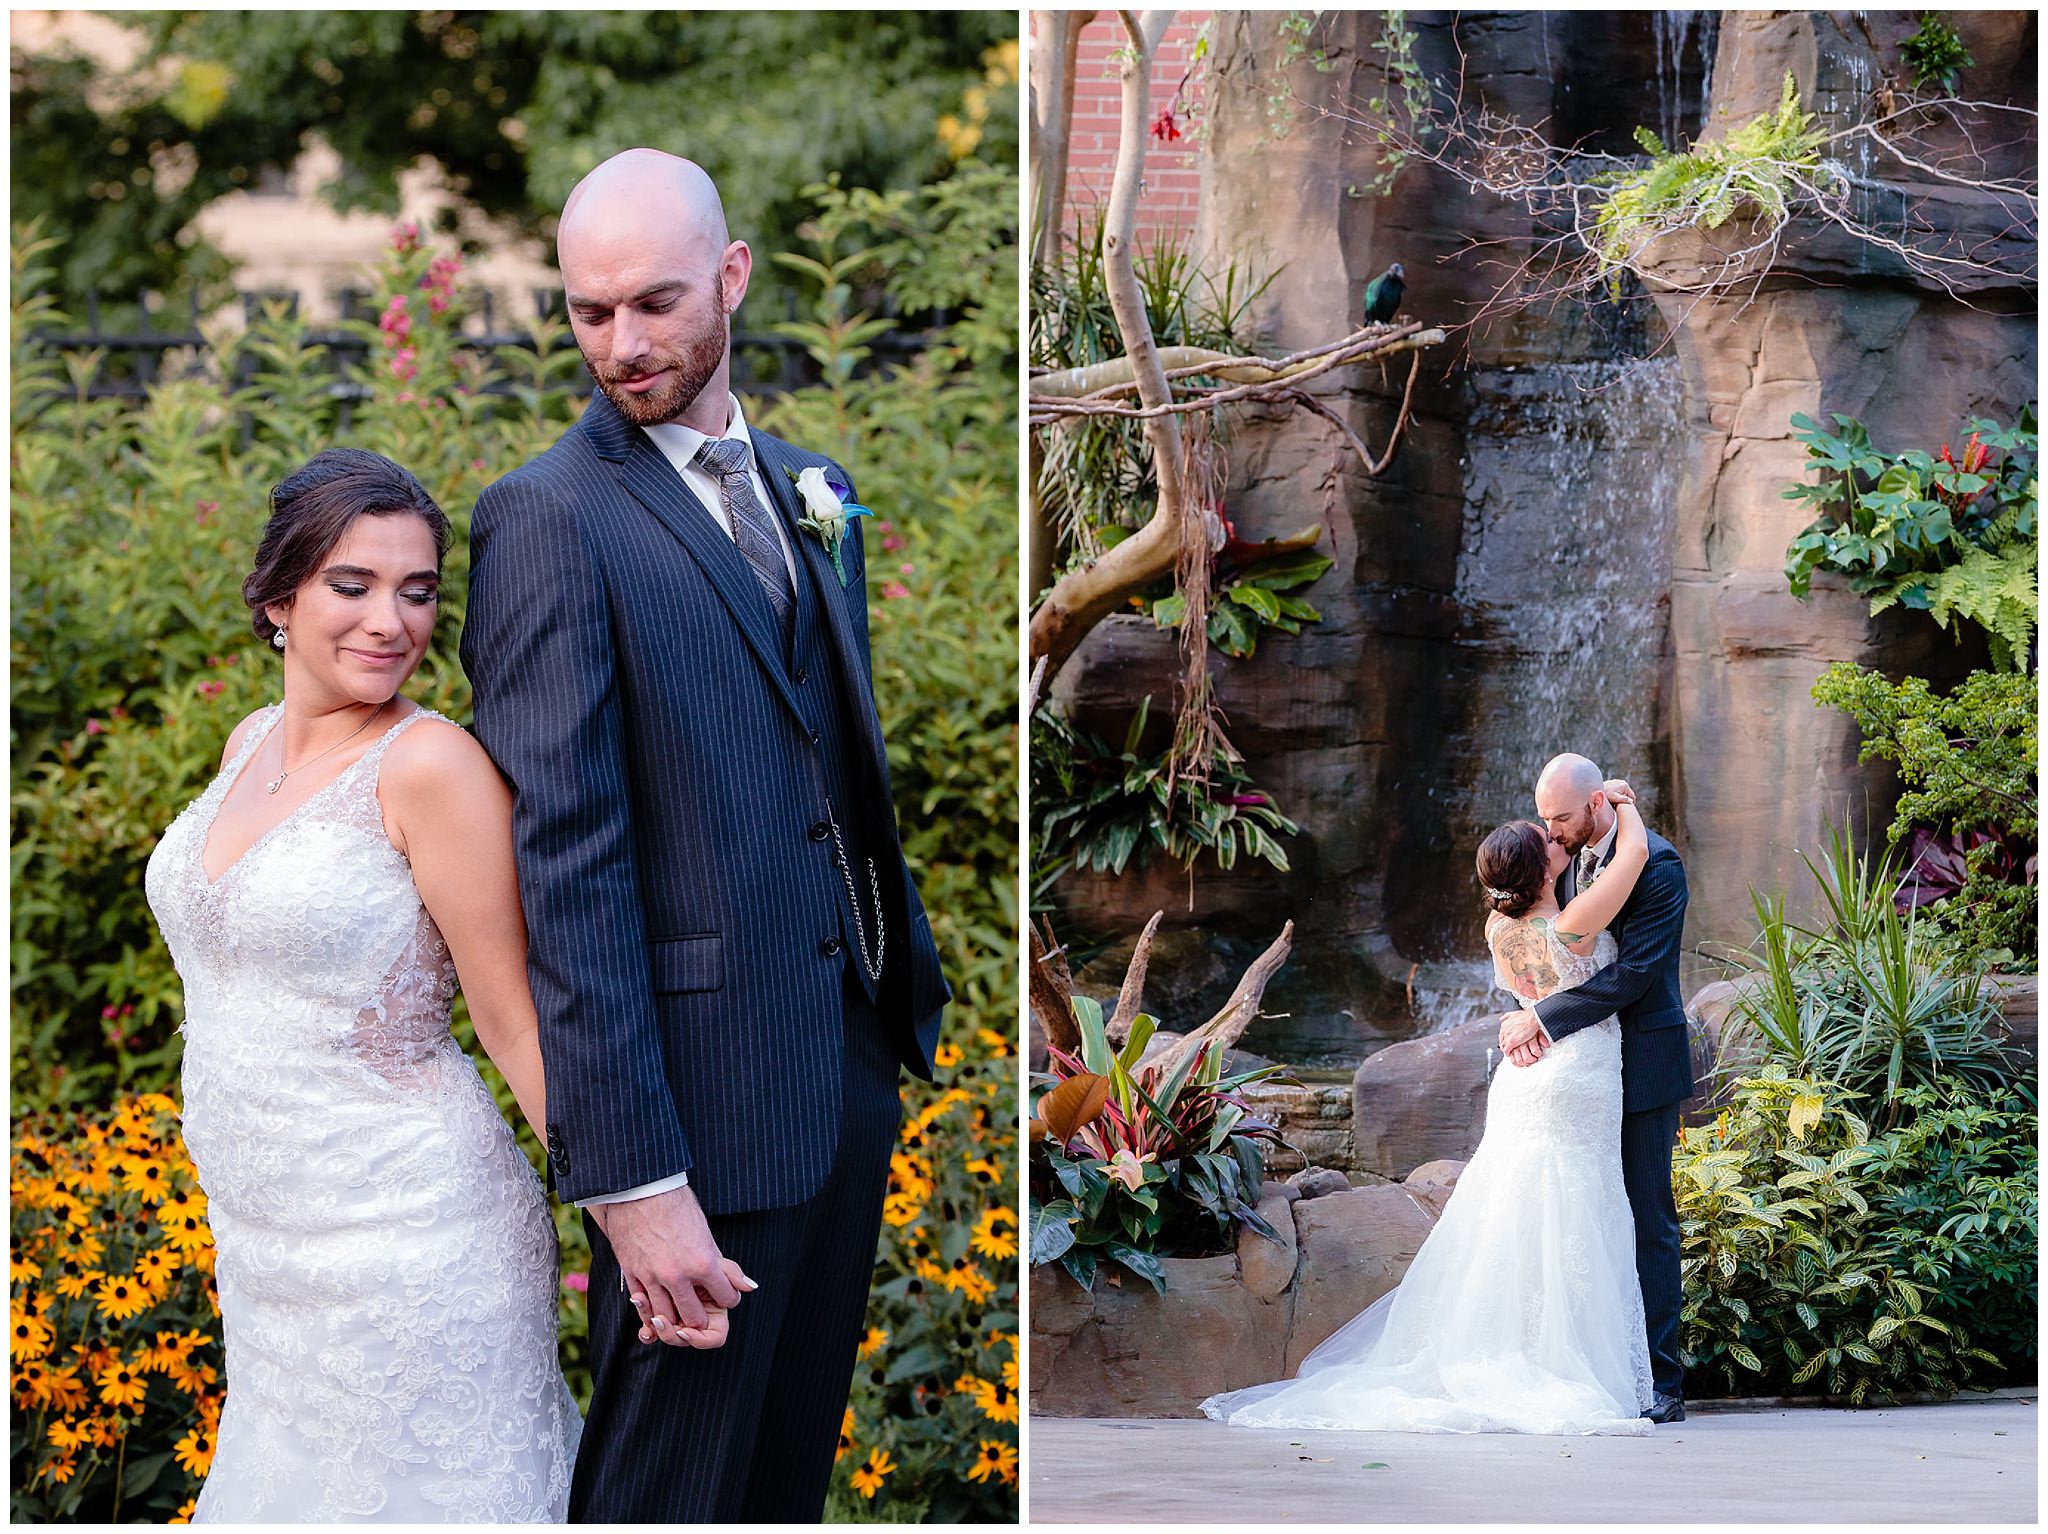 Bride & groom kiss in front of a waterfall in the Tropical Rainforest at the National Aviary